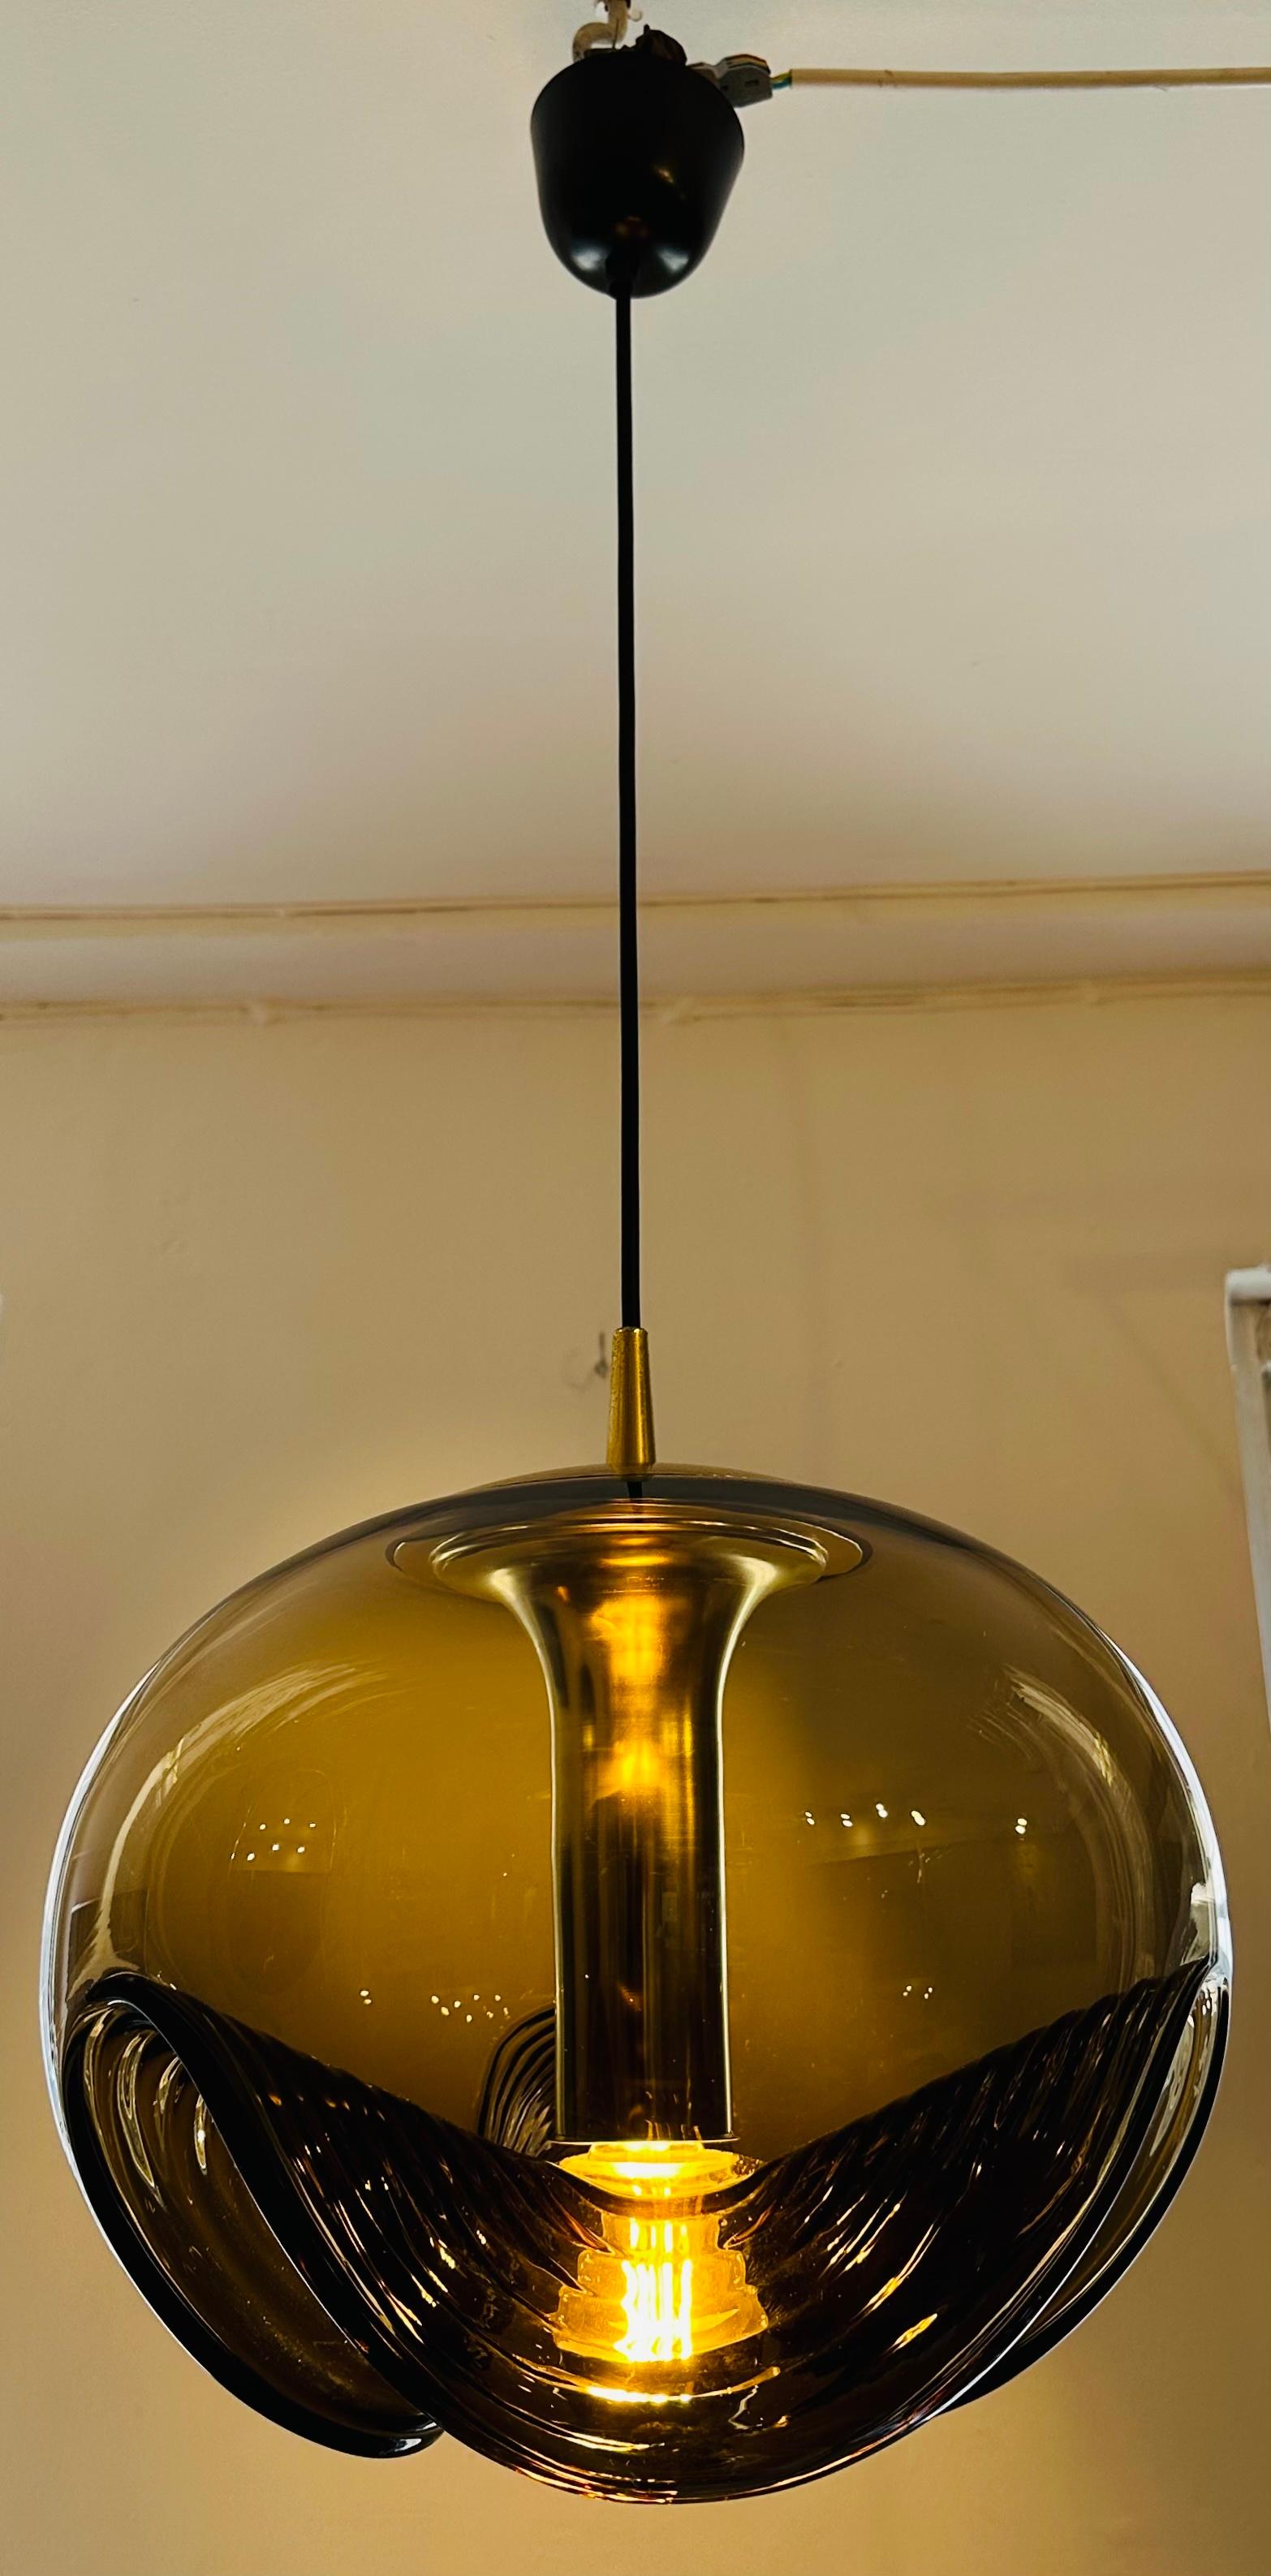 The largest version of this beautiful hanging pendant light from the 'Futura' range which is also more commonly called 'Wave' which was manufactured in Germany by Peill & Putzler during the 1970s. The three-wave smoked ribbed glass shade is